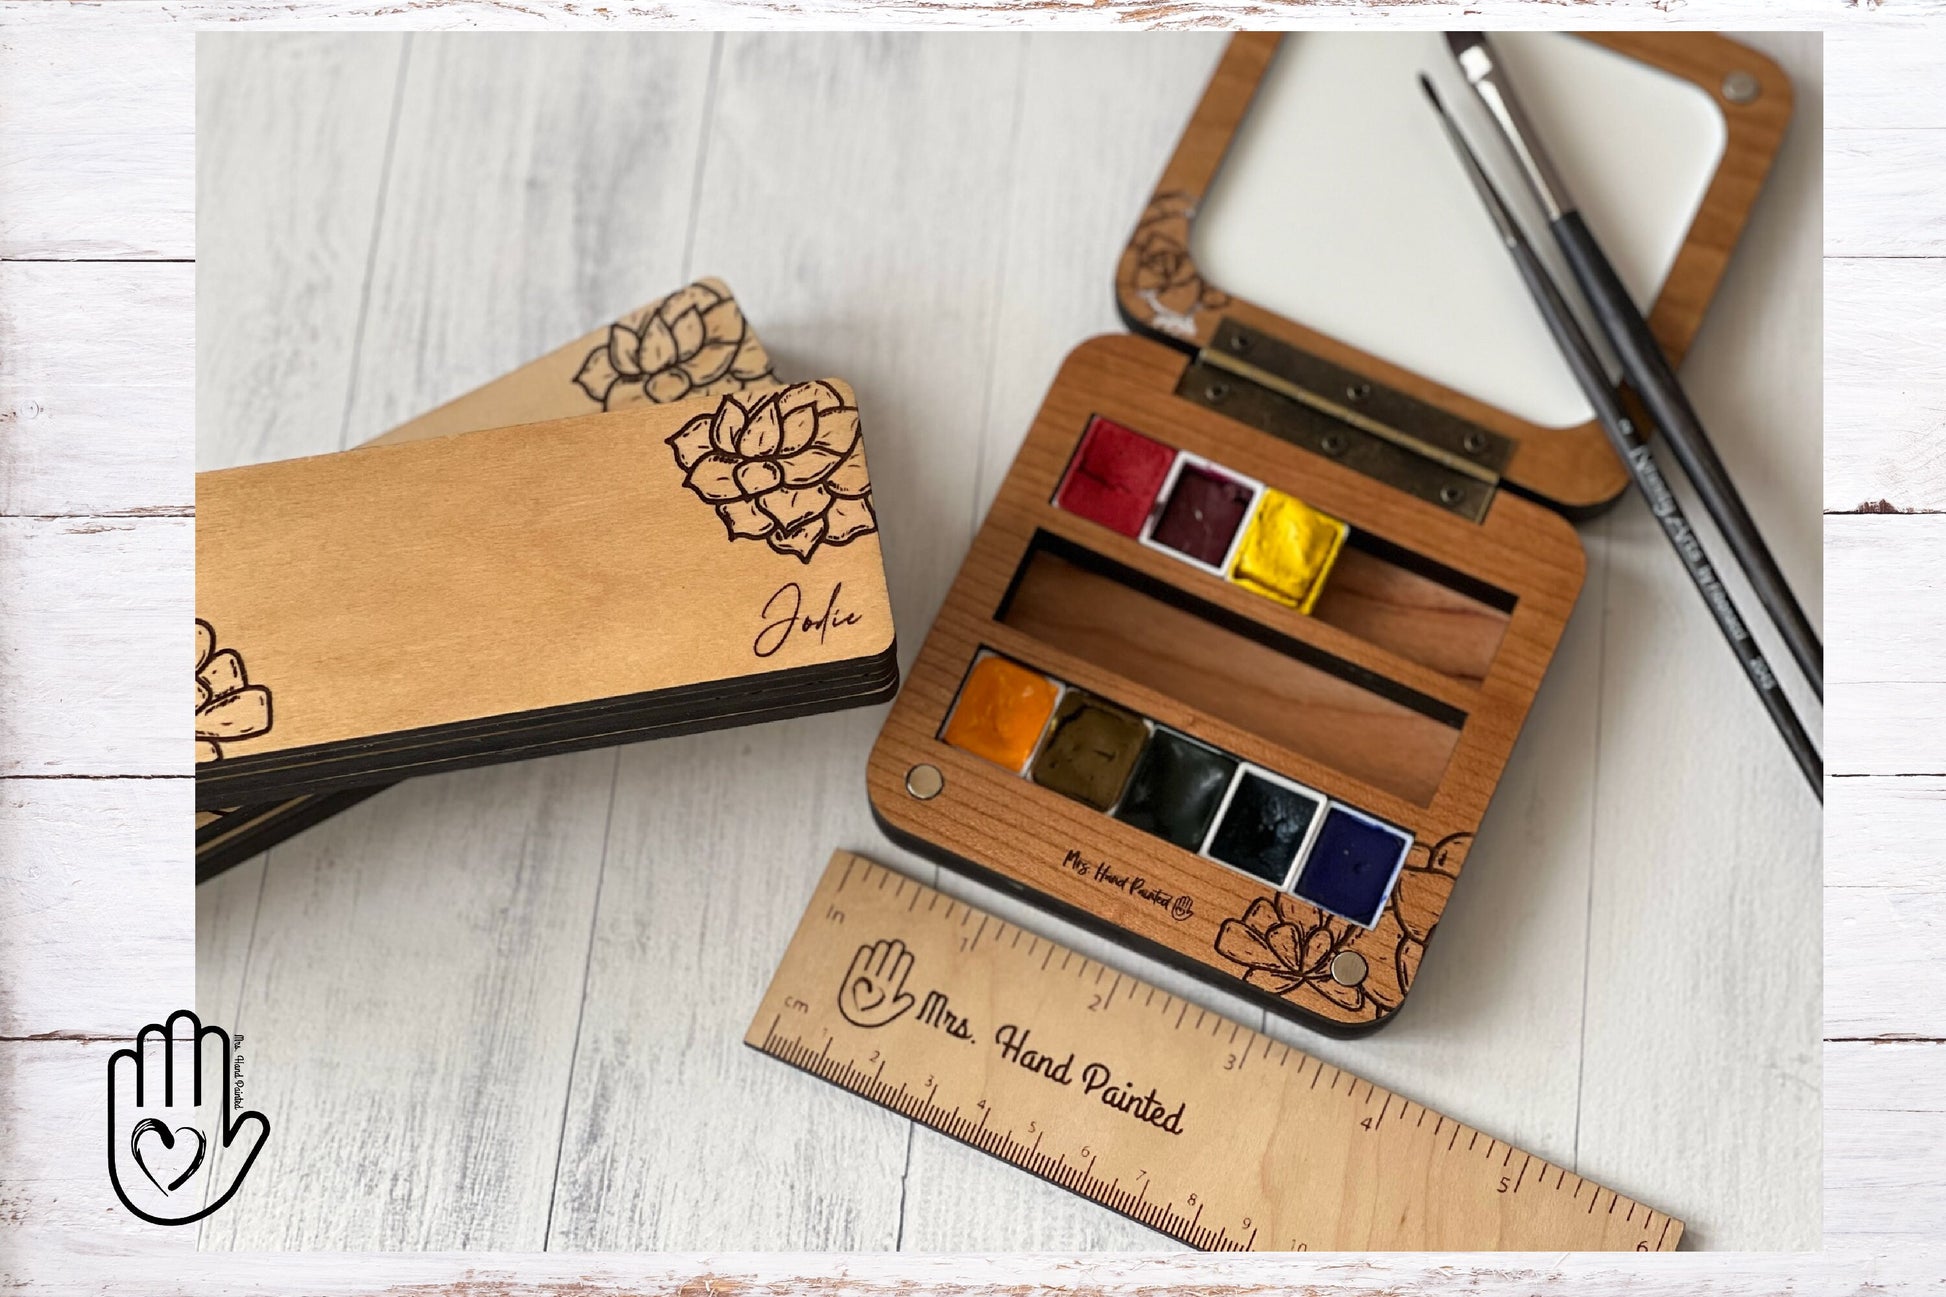 Custom Hinged Lid Watercolor Box with Succulent Engraving Artwork and Personalization